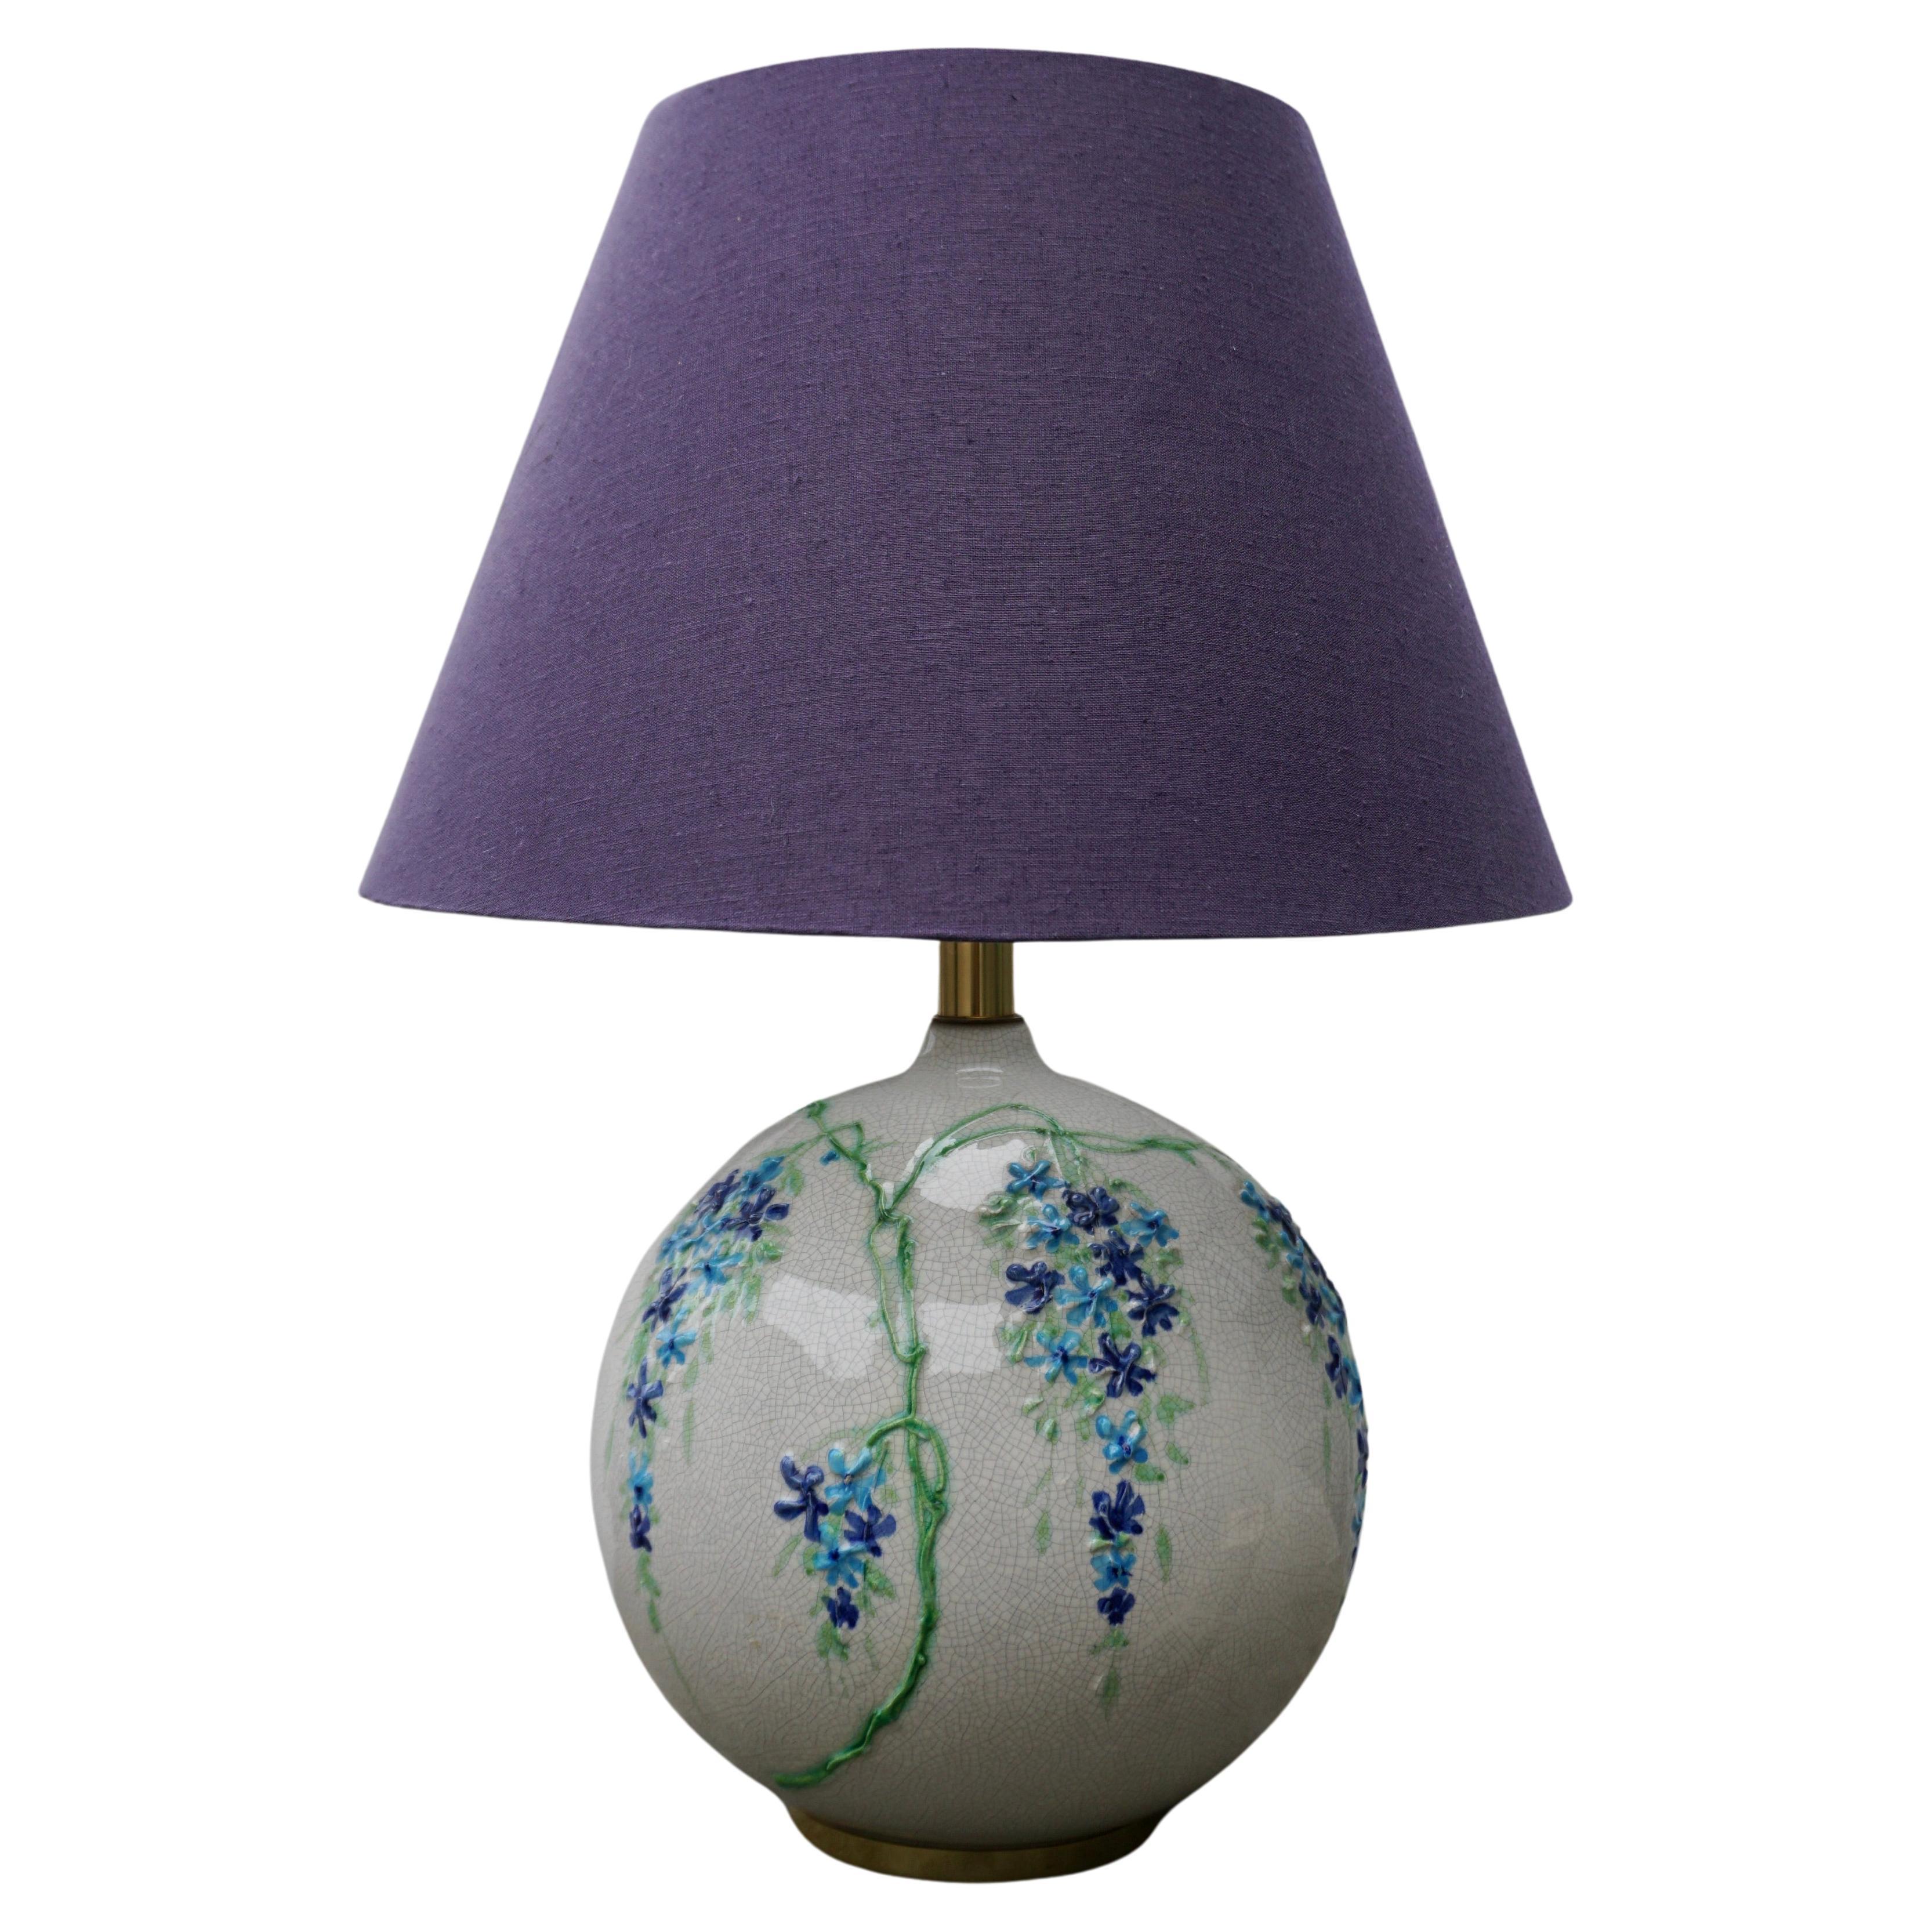 Colourful Ceramic Table Lamp by Alvino Bagni for Raymor